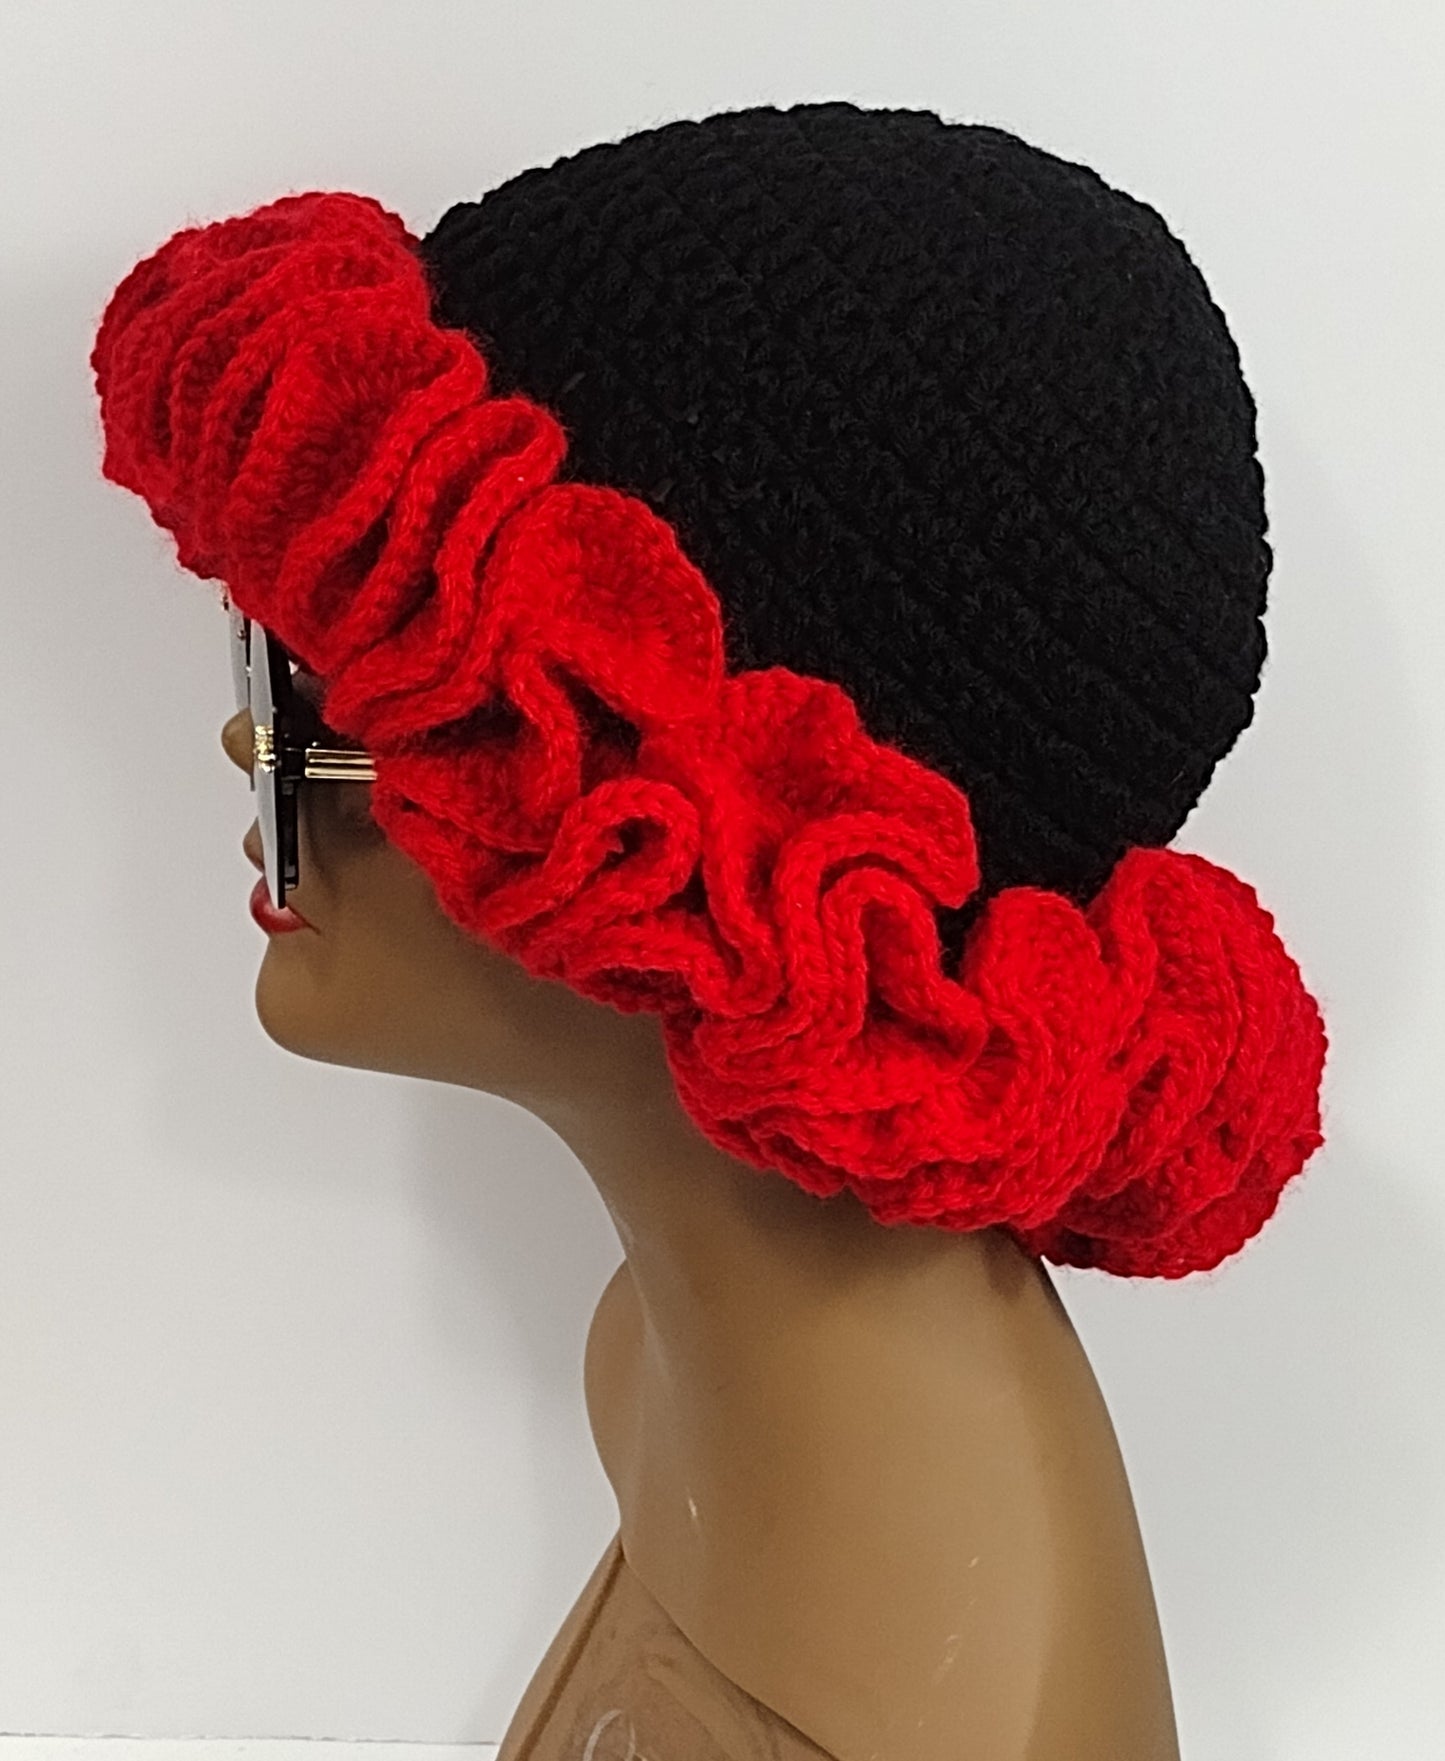 Blk Lotus Co Diva Crown with Black Beanie and Red Ruffles: Bold and Glamorous Accessory